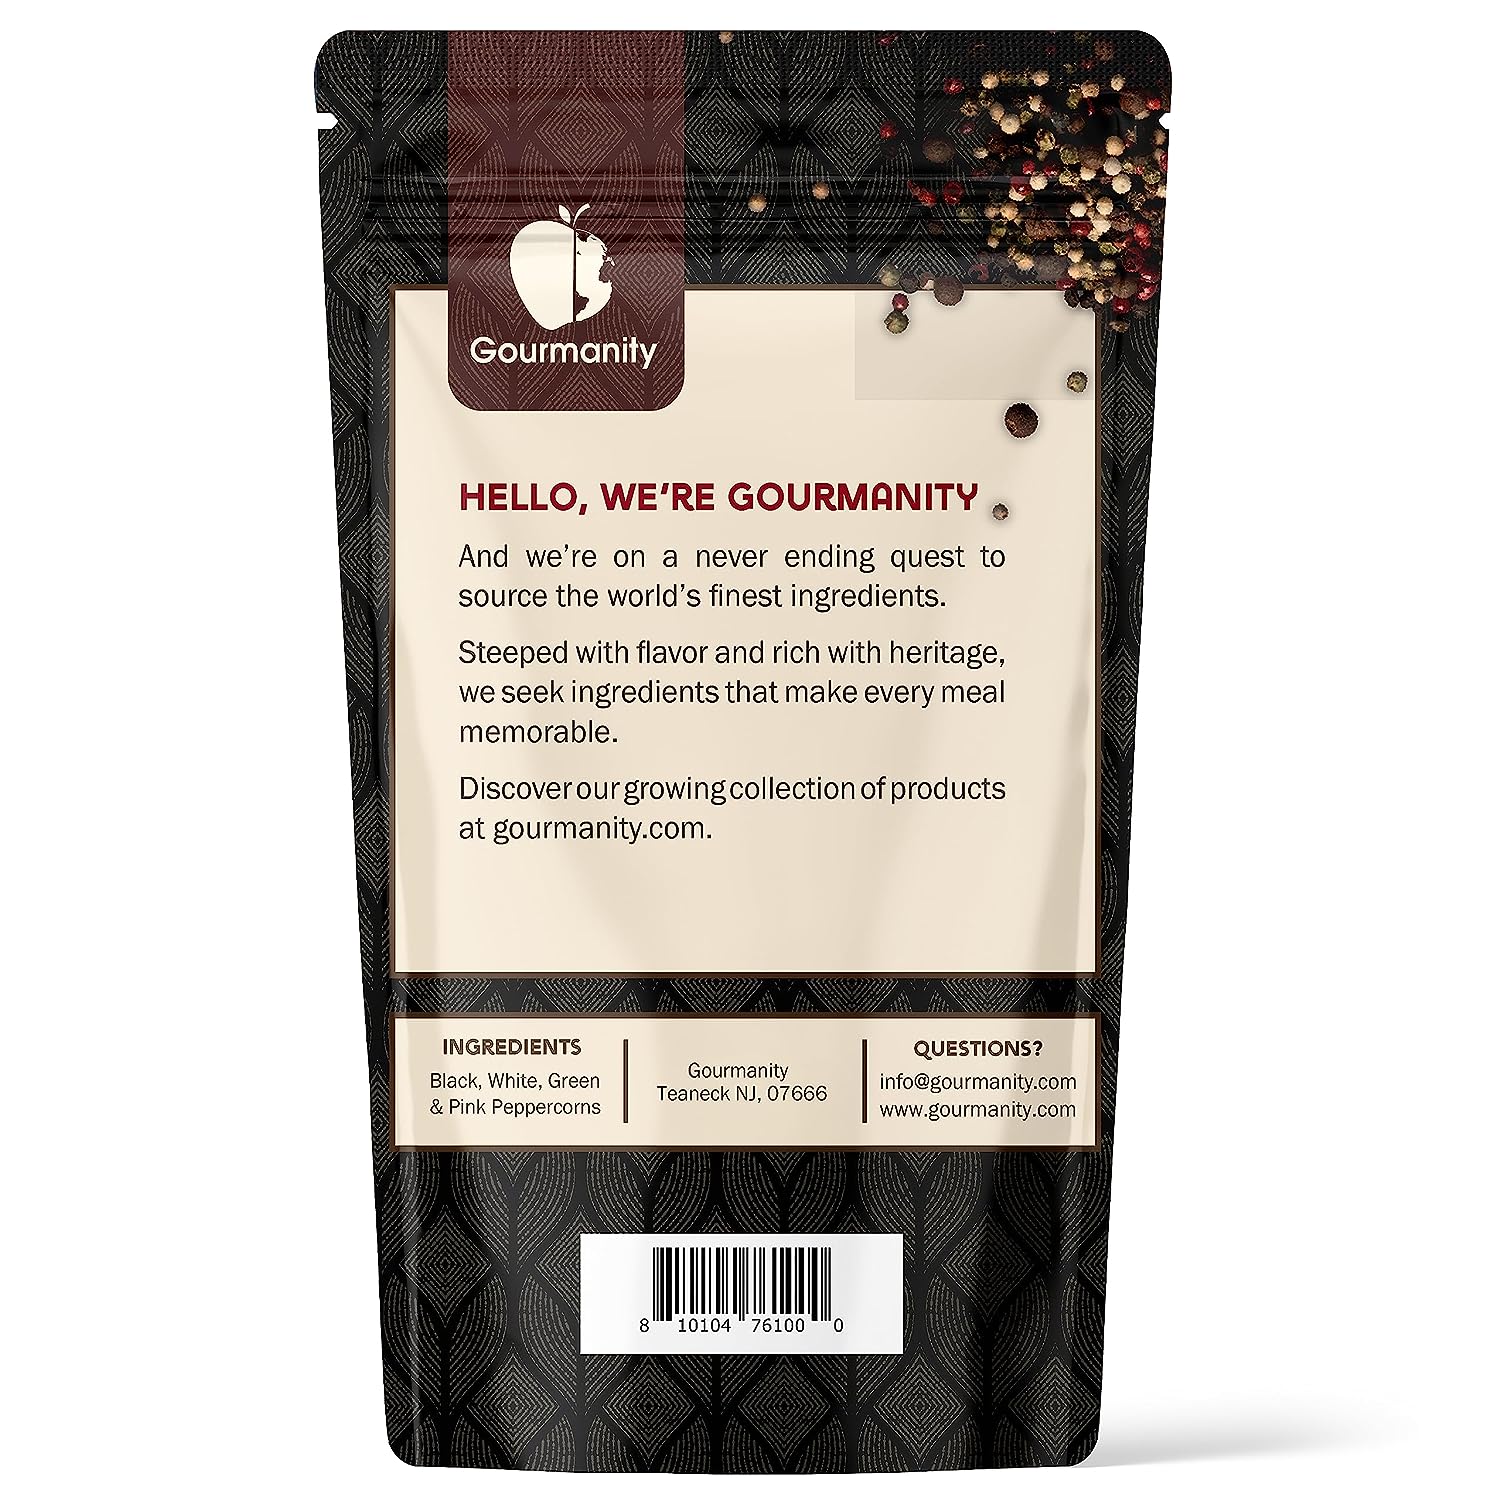 Gourmanity Mixed Whole Peppercorns 1lb - Gourmanity